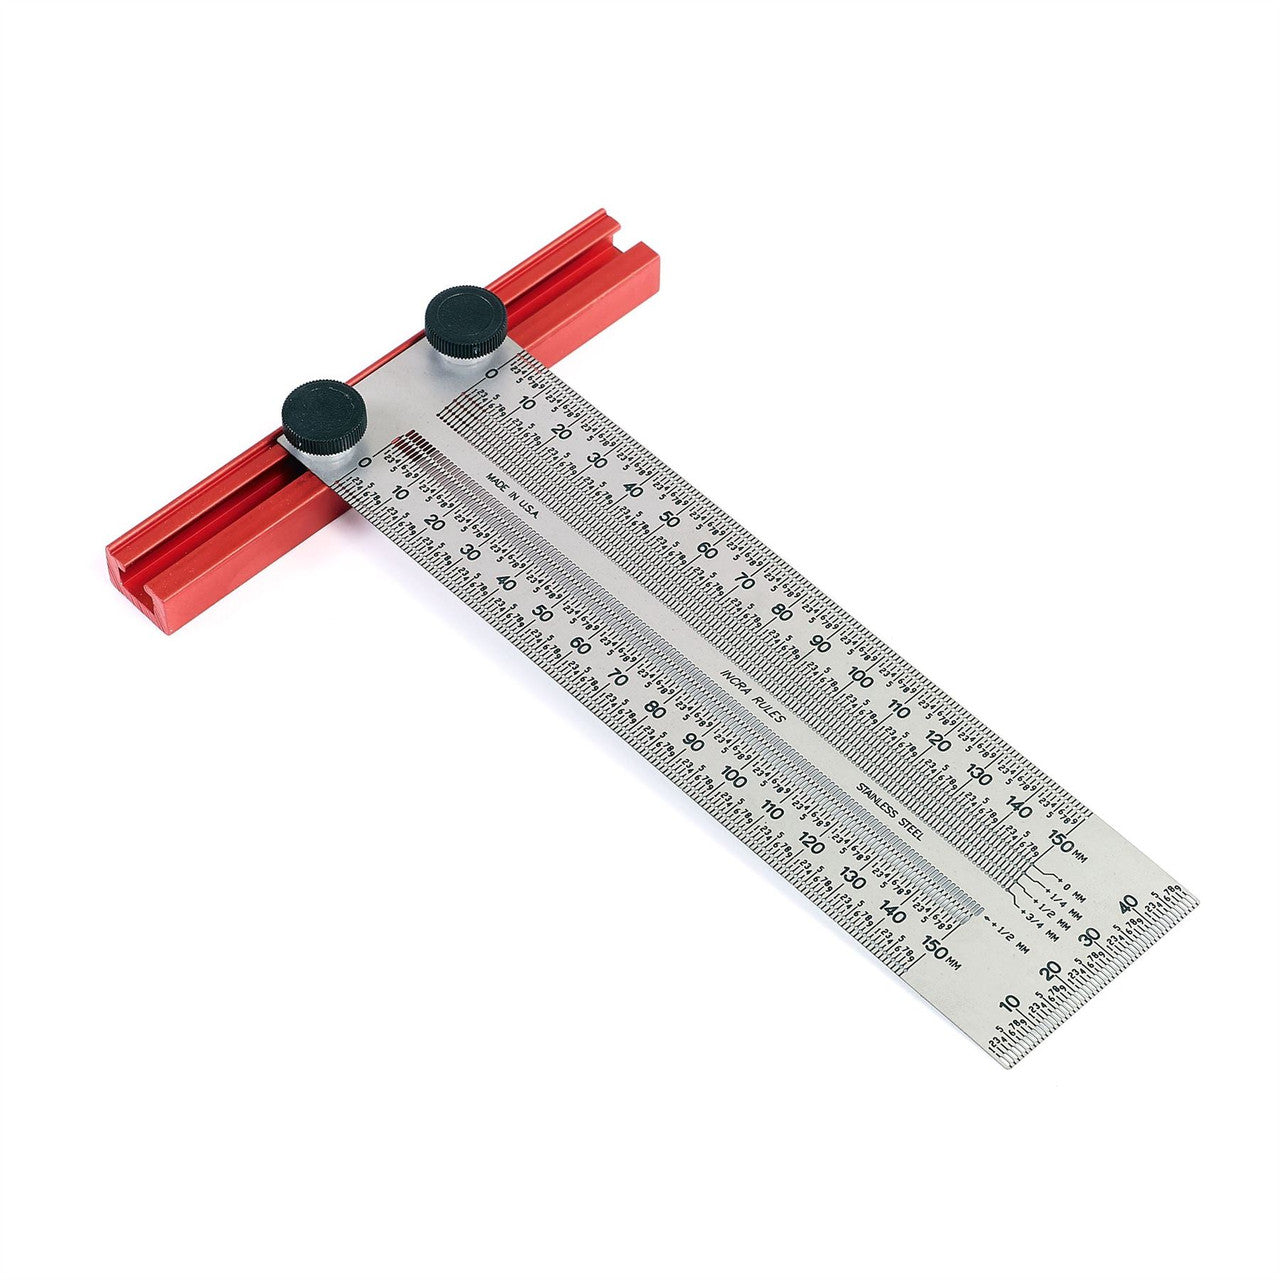 Incra Precision Metric T-Rules ( Select Size )